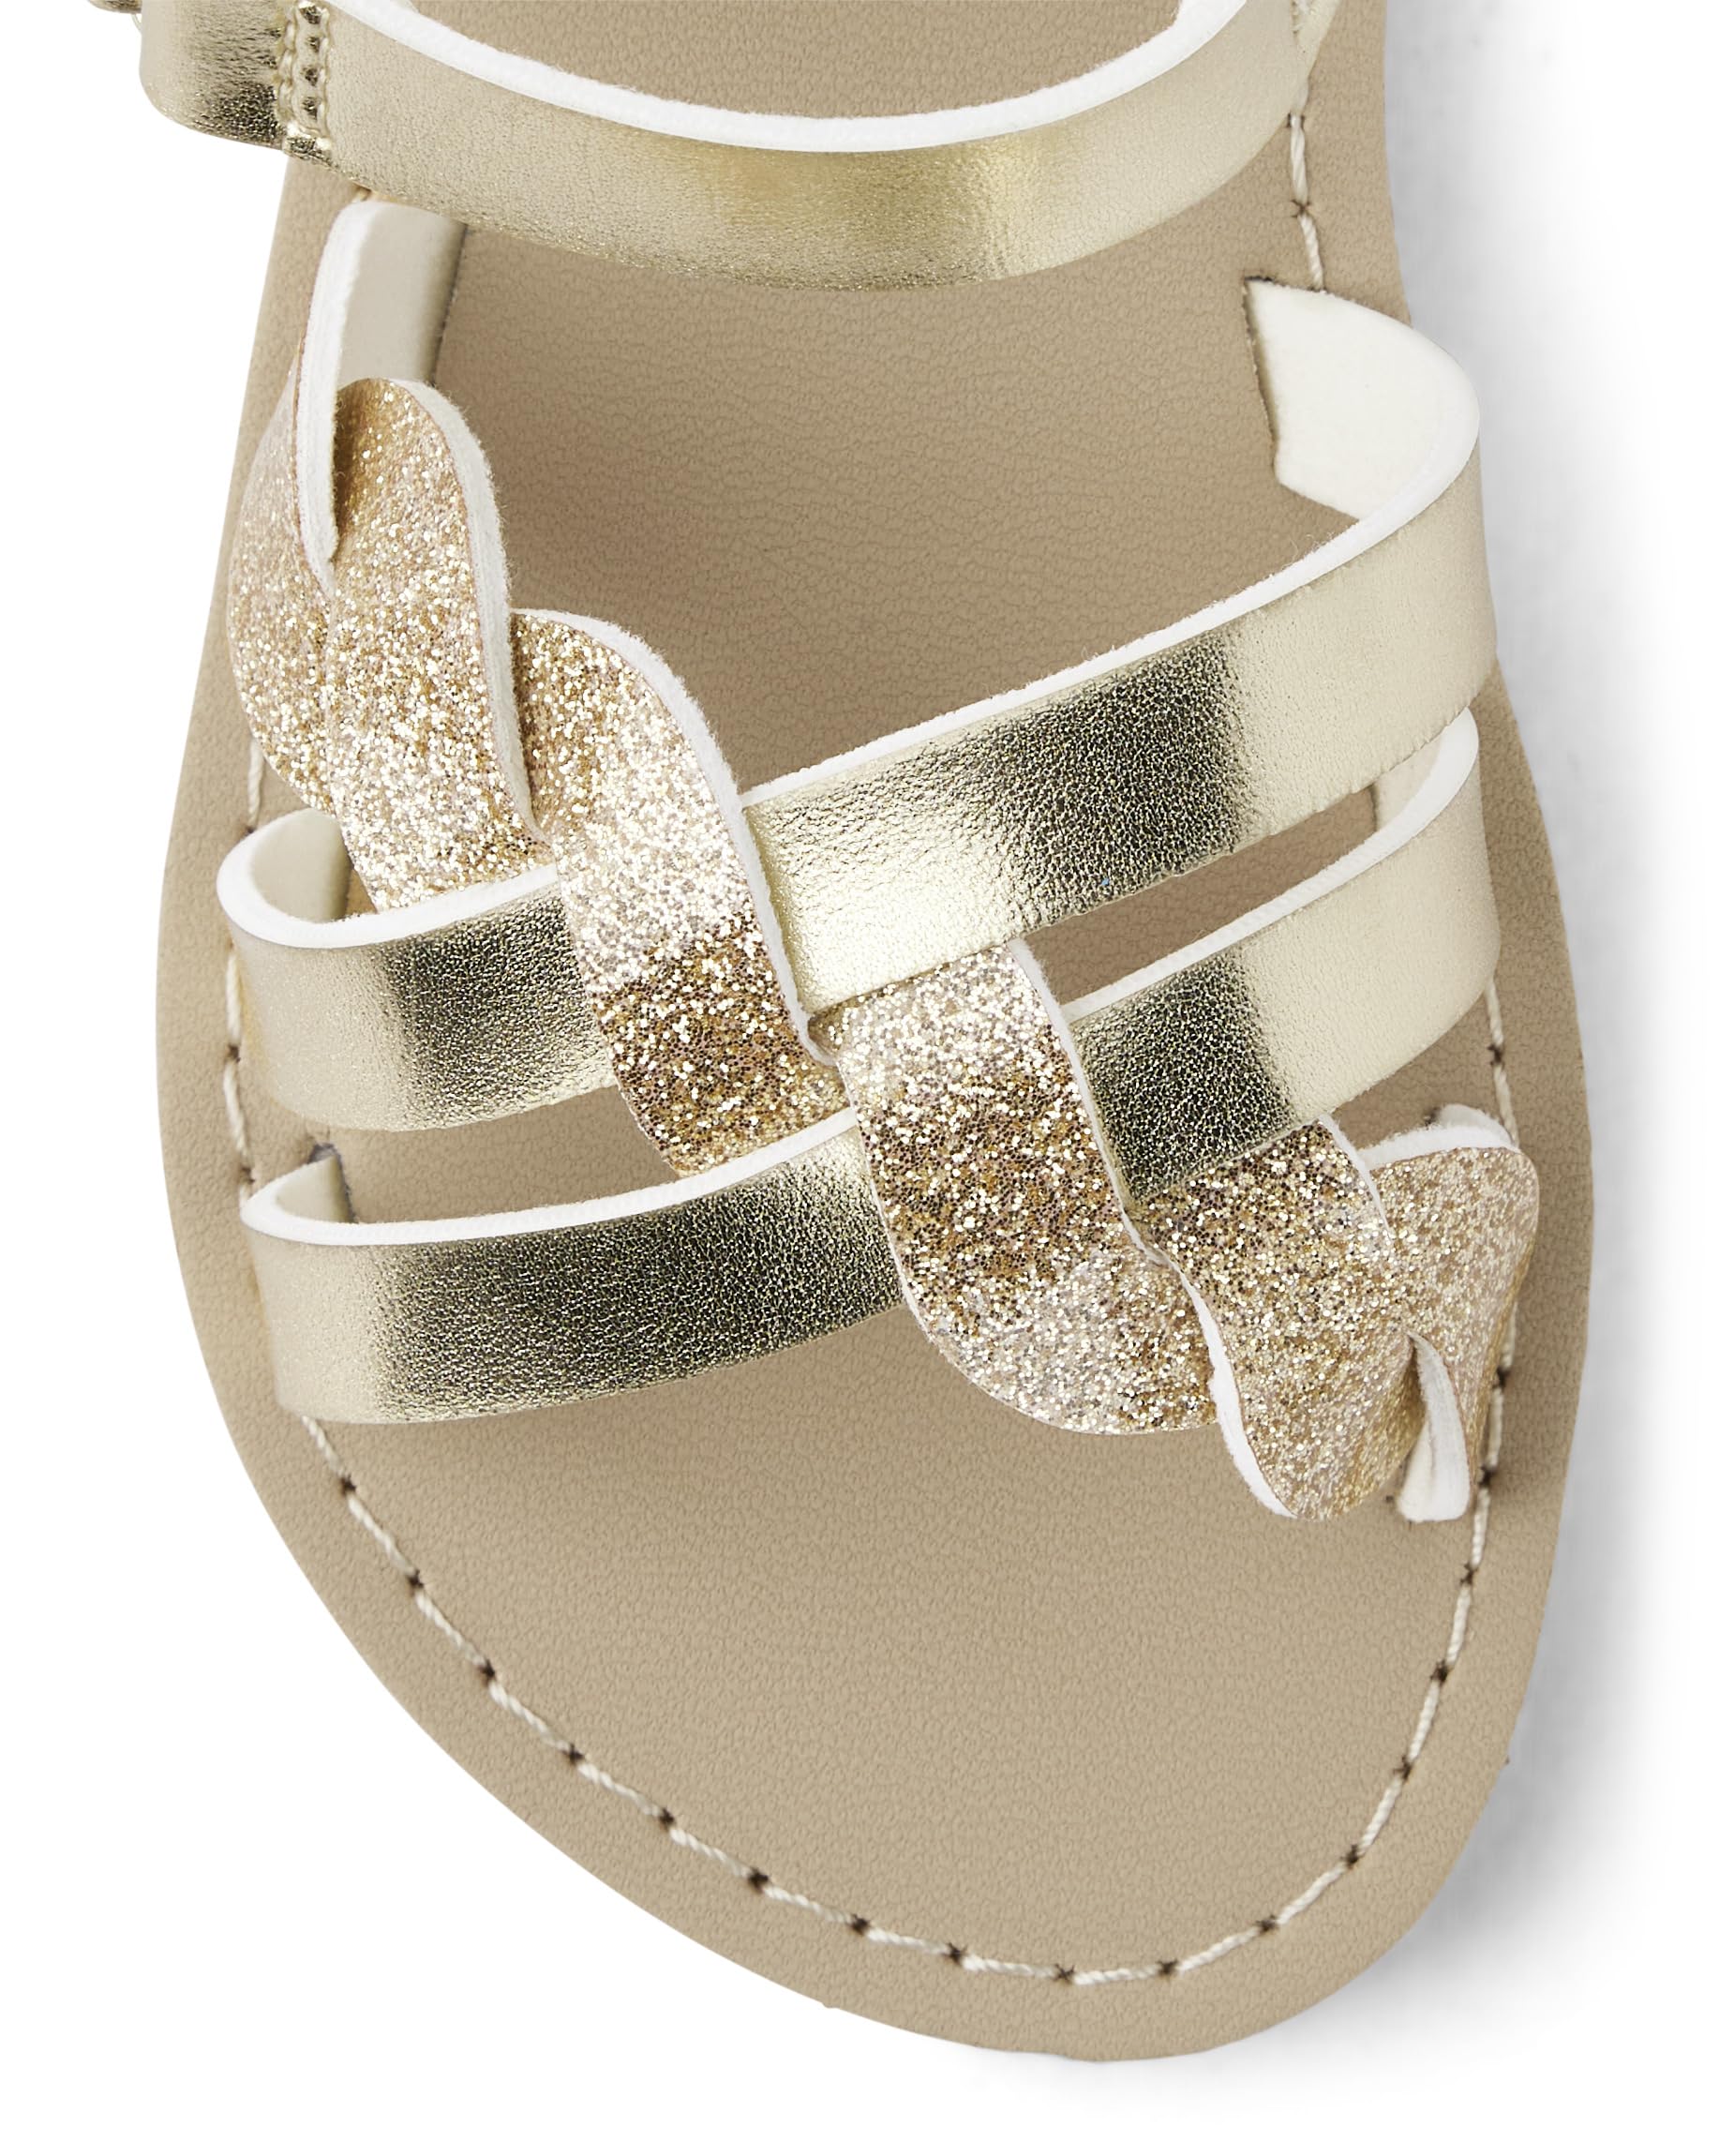 Gymboree Girl's and Toddler Flat Sandals Slipper